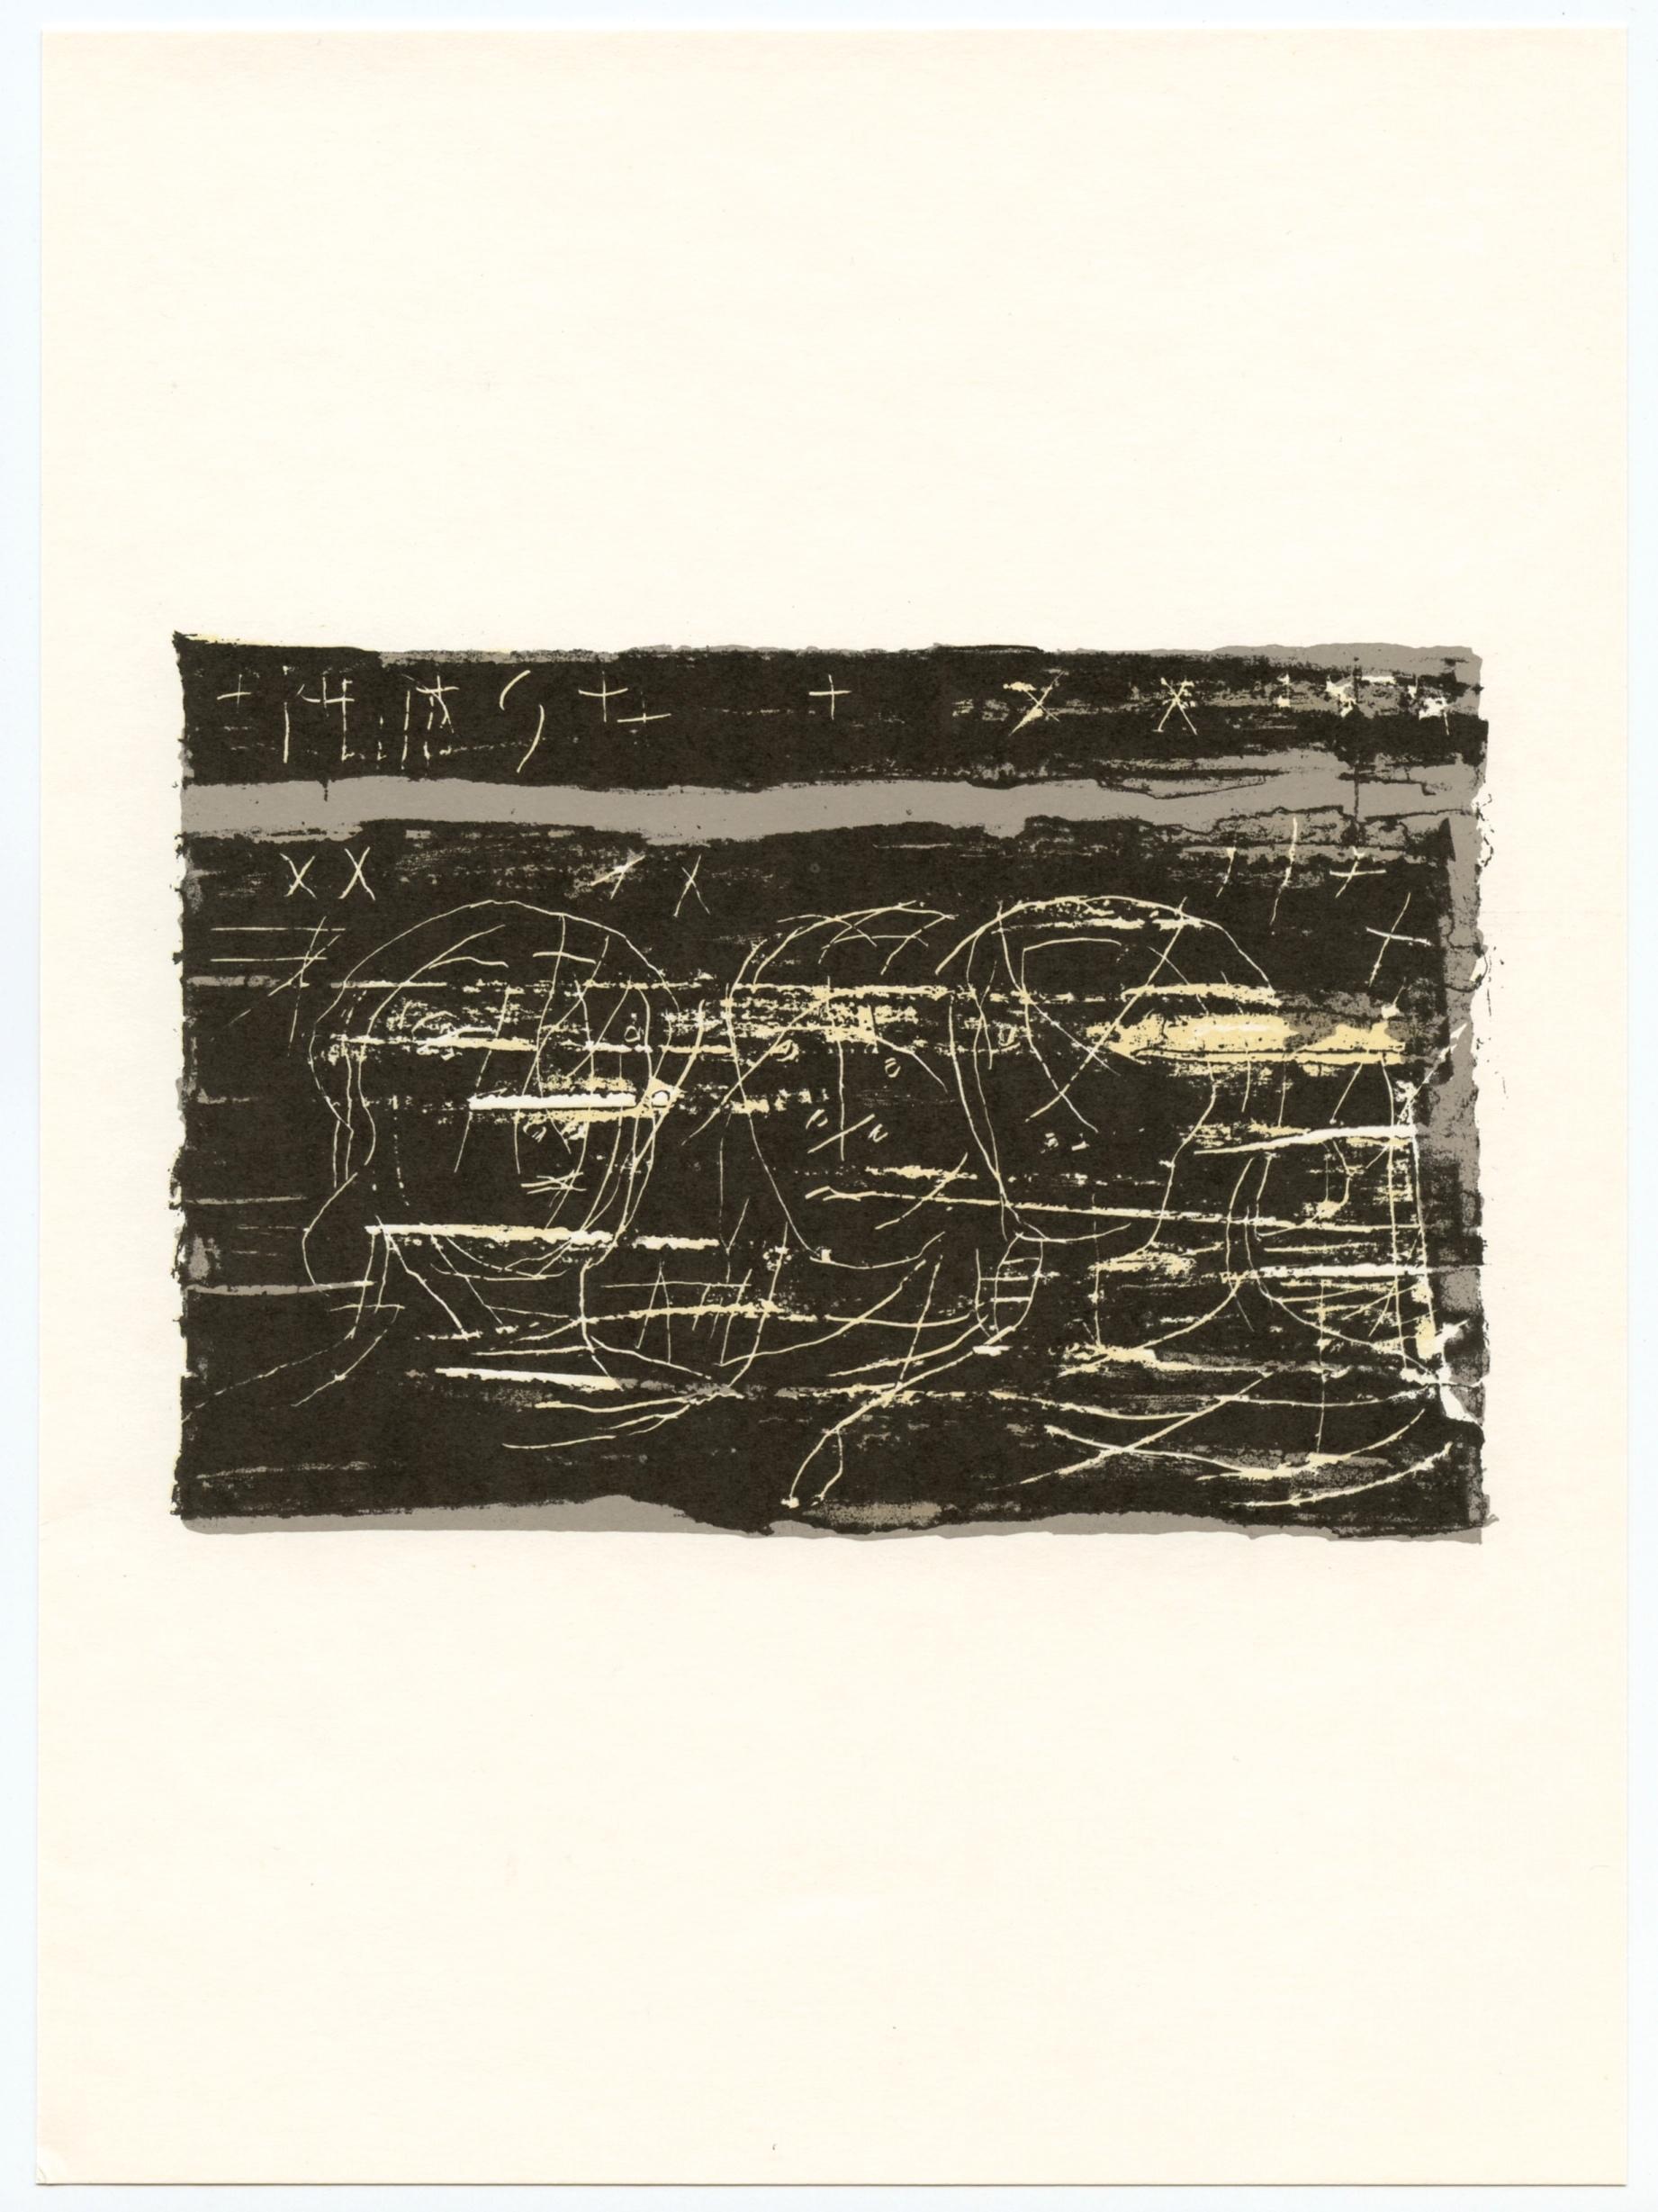 Medium: lithograph (after Henry Moore). Printed in 1979 by La Poligrafa and issued in an edition of 1000. The image size is 4 x 6 inches and the sheet size is 10 x 7 3/8 inches (255 x 187 mm). Not signed.